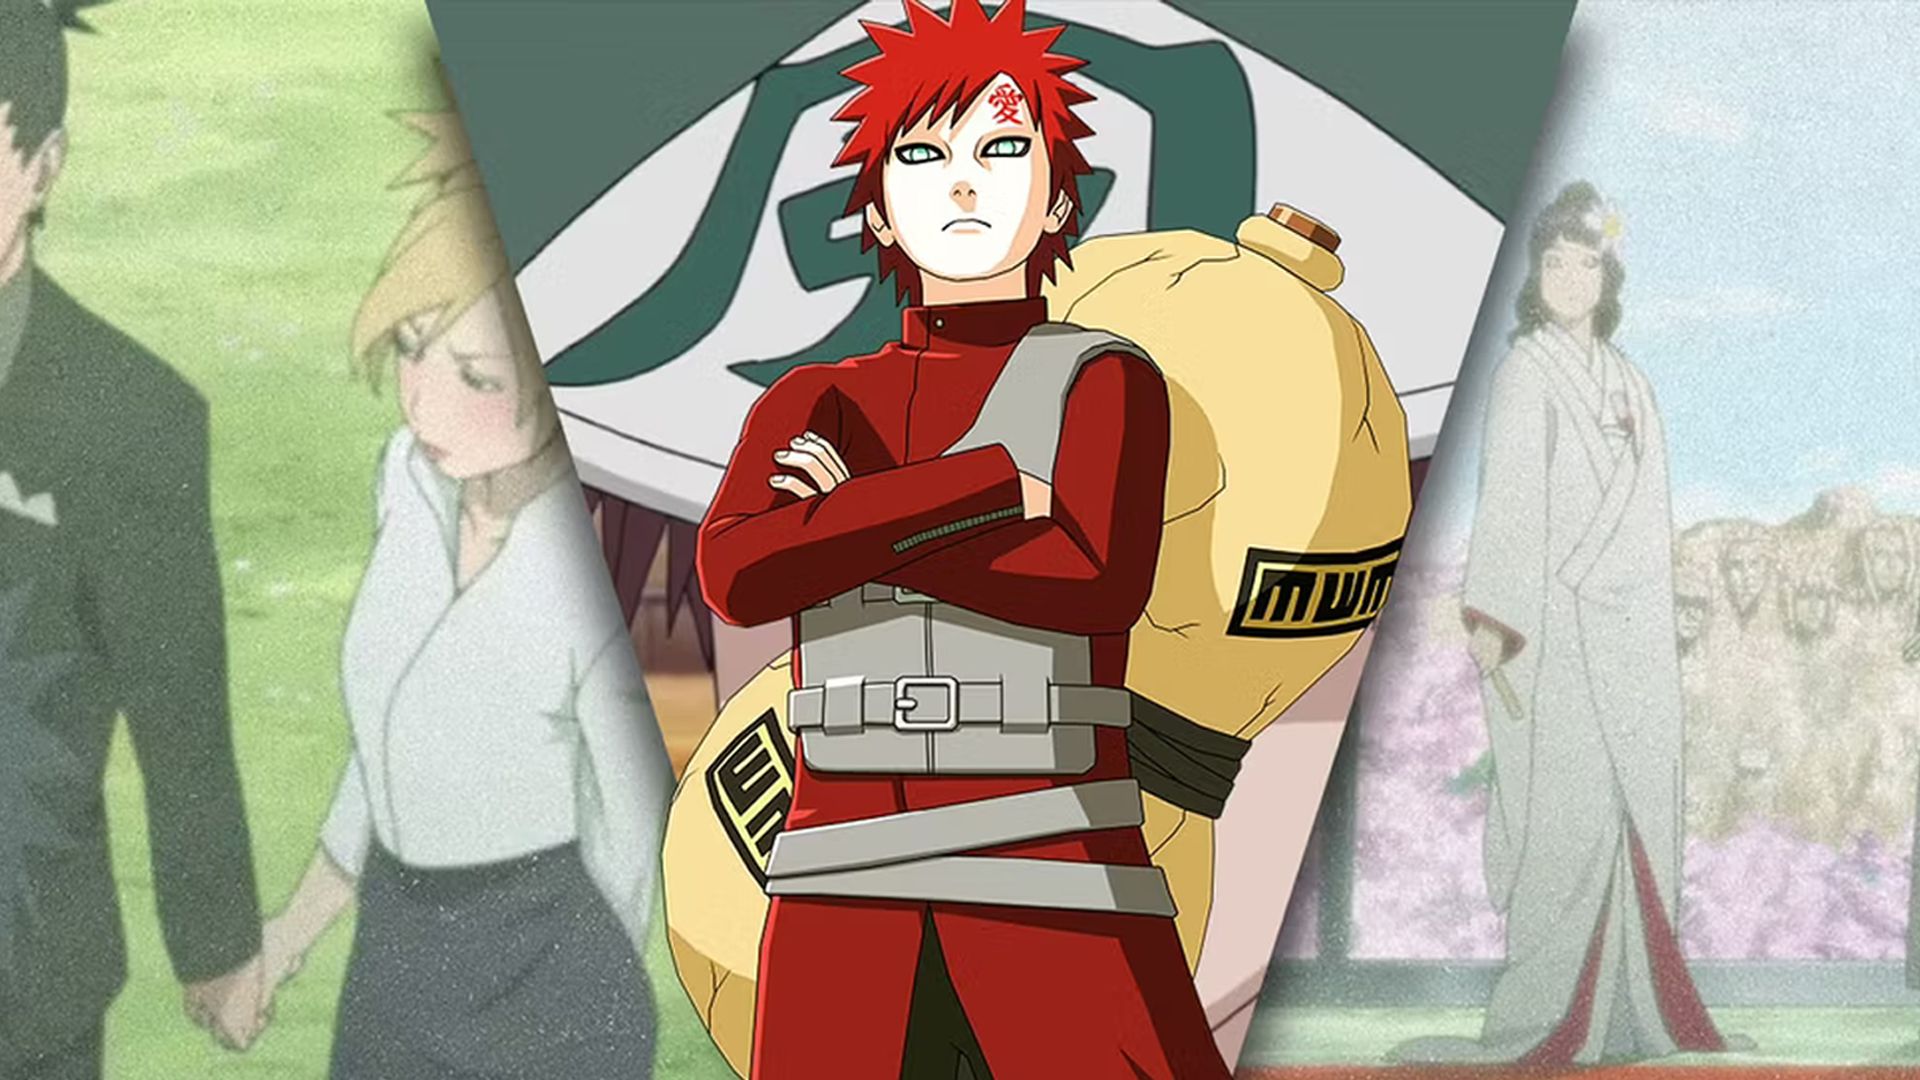 Gaara with other Naruto Shippuden characters.